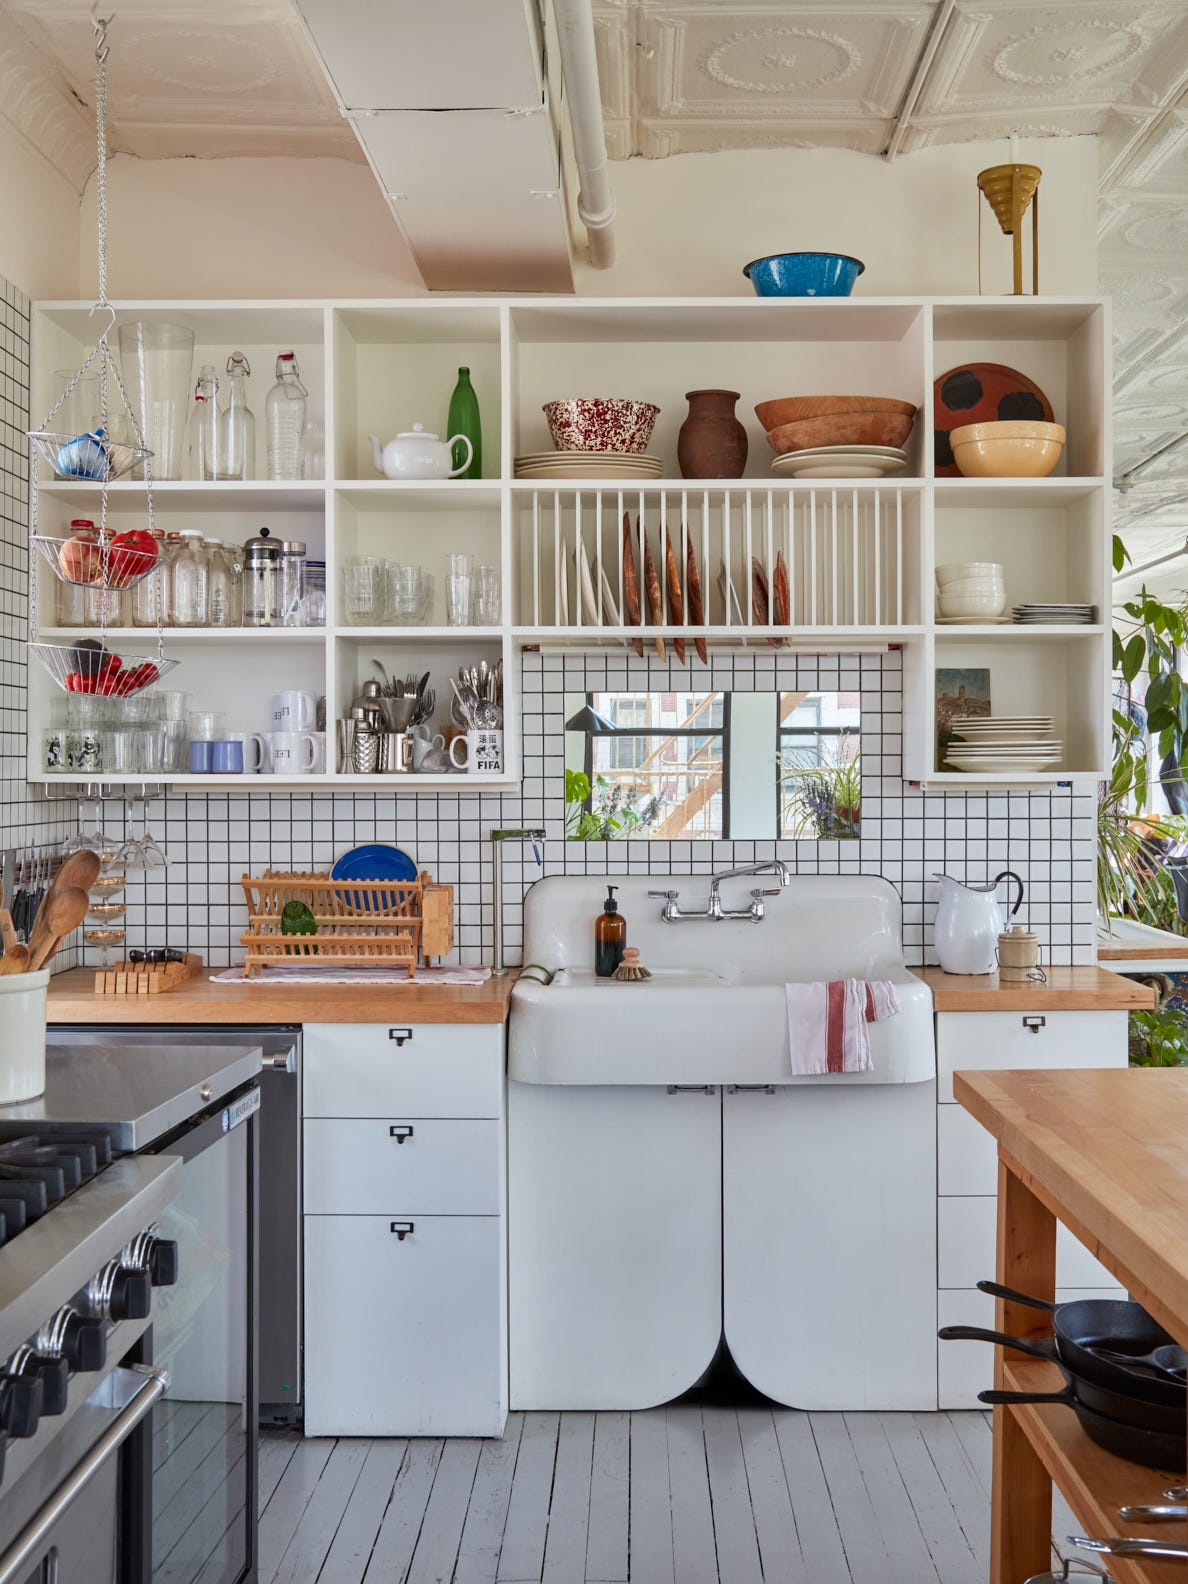 If You Dig Pegboards and Pot Racks, Then You’re Probably a Utility Kitchen Person